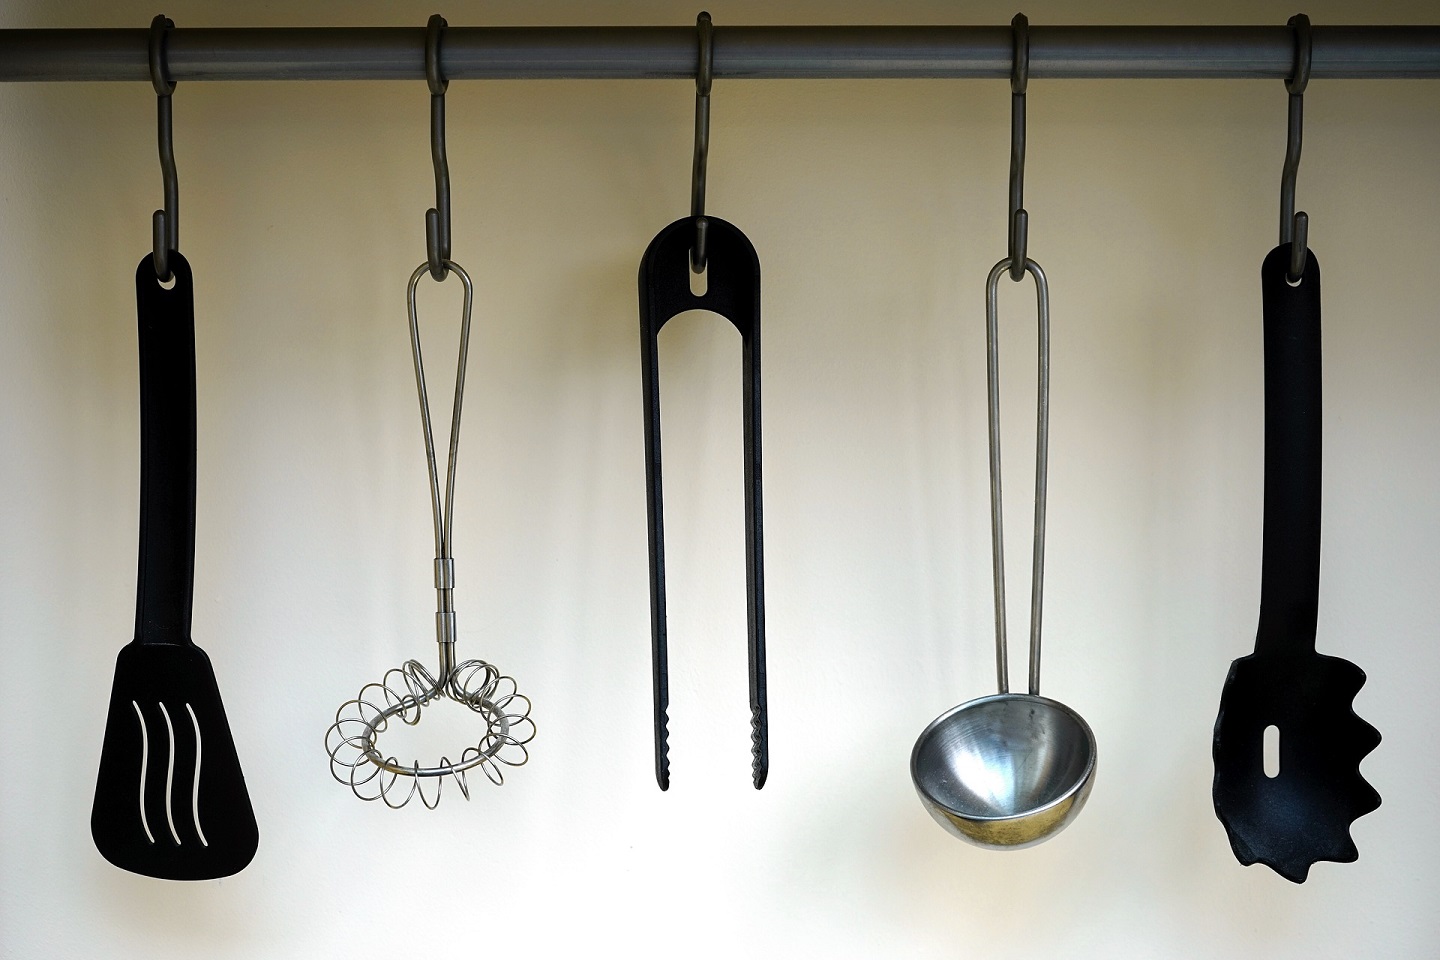 You can use your method of hanging the utensils in the kitchen to save more space